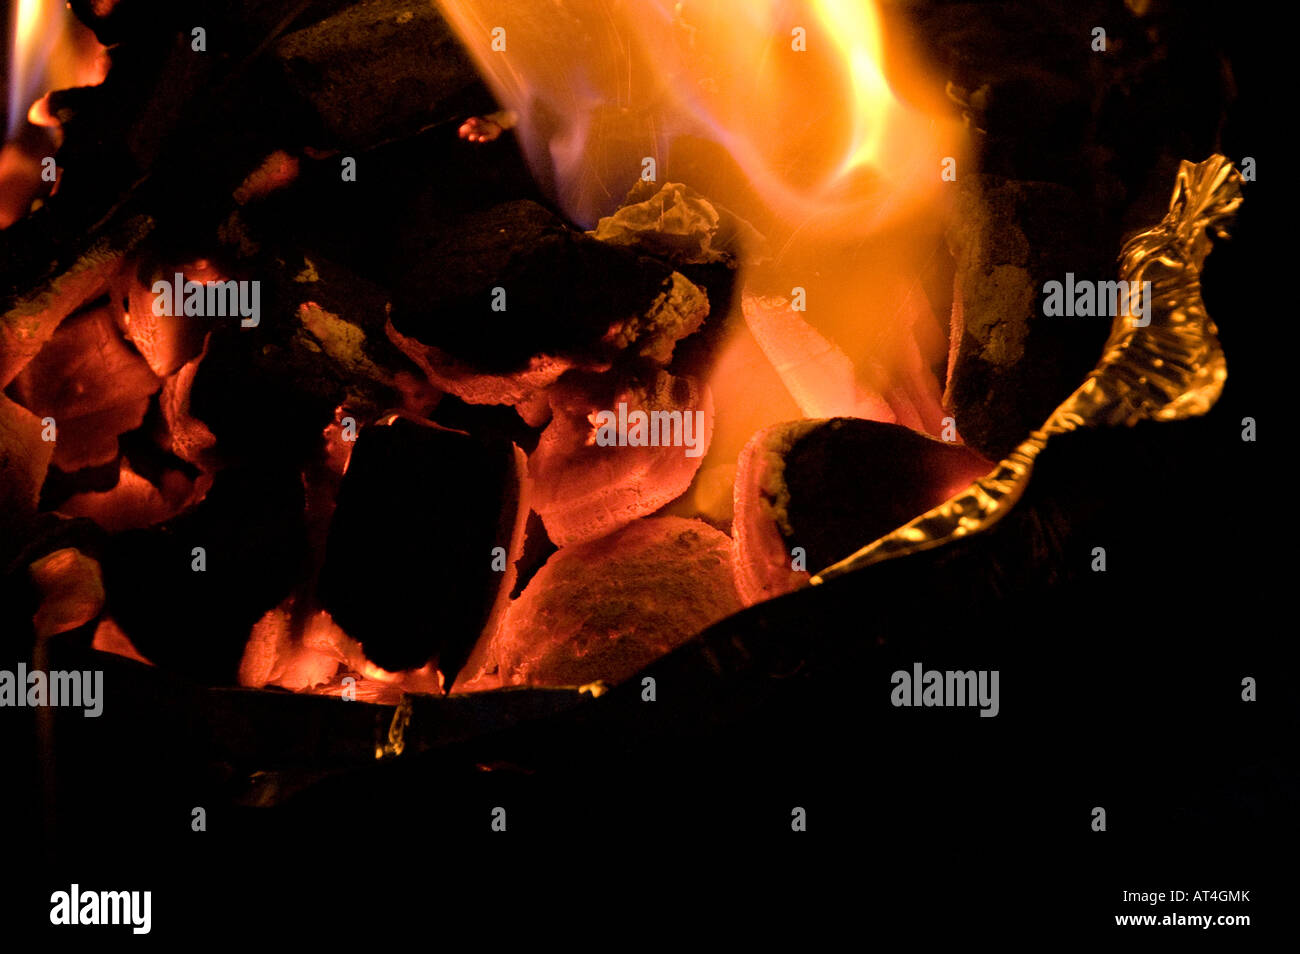 Coals burning and glowing Stock Photo